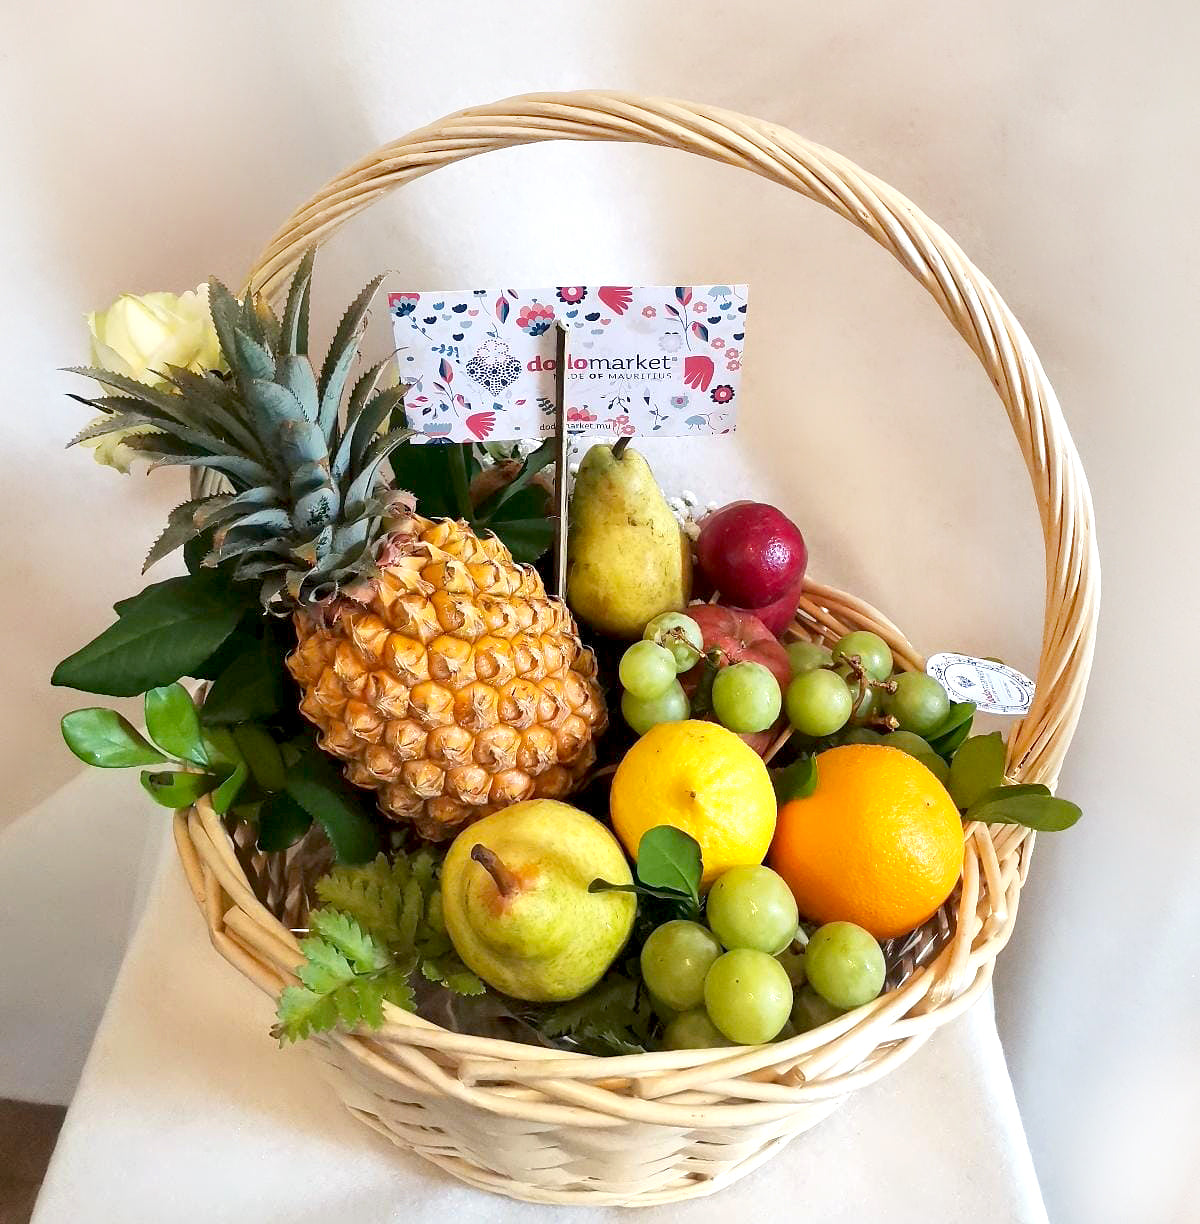 Cute-Fruits-Flowers-Basket-Gift-Hamper-Dodomarket-delivery-Mauritius